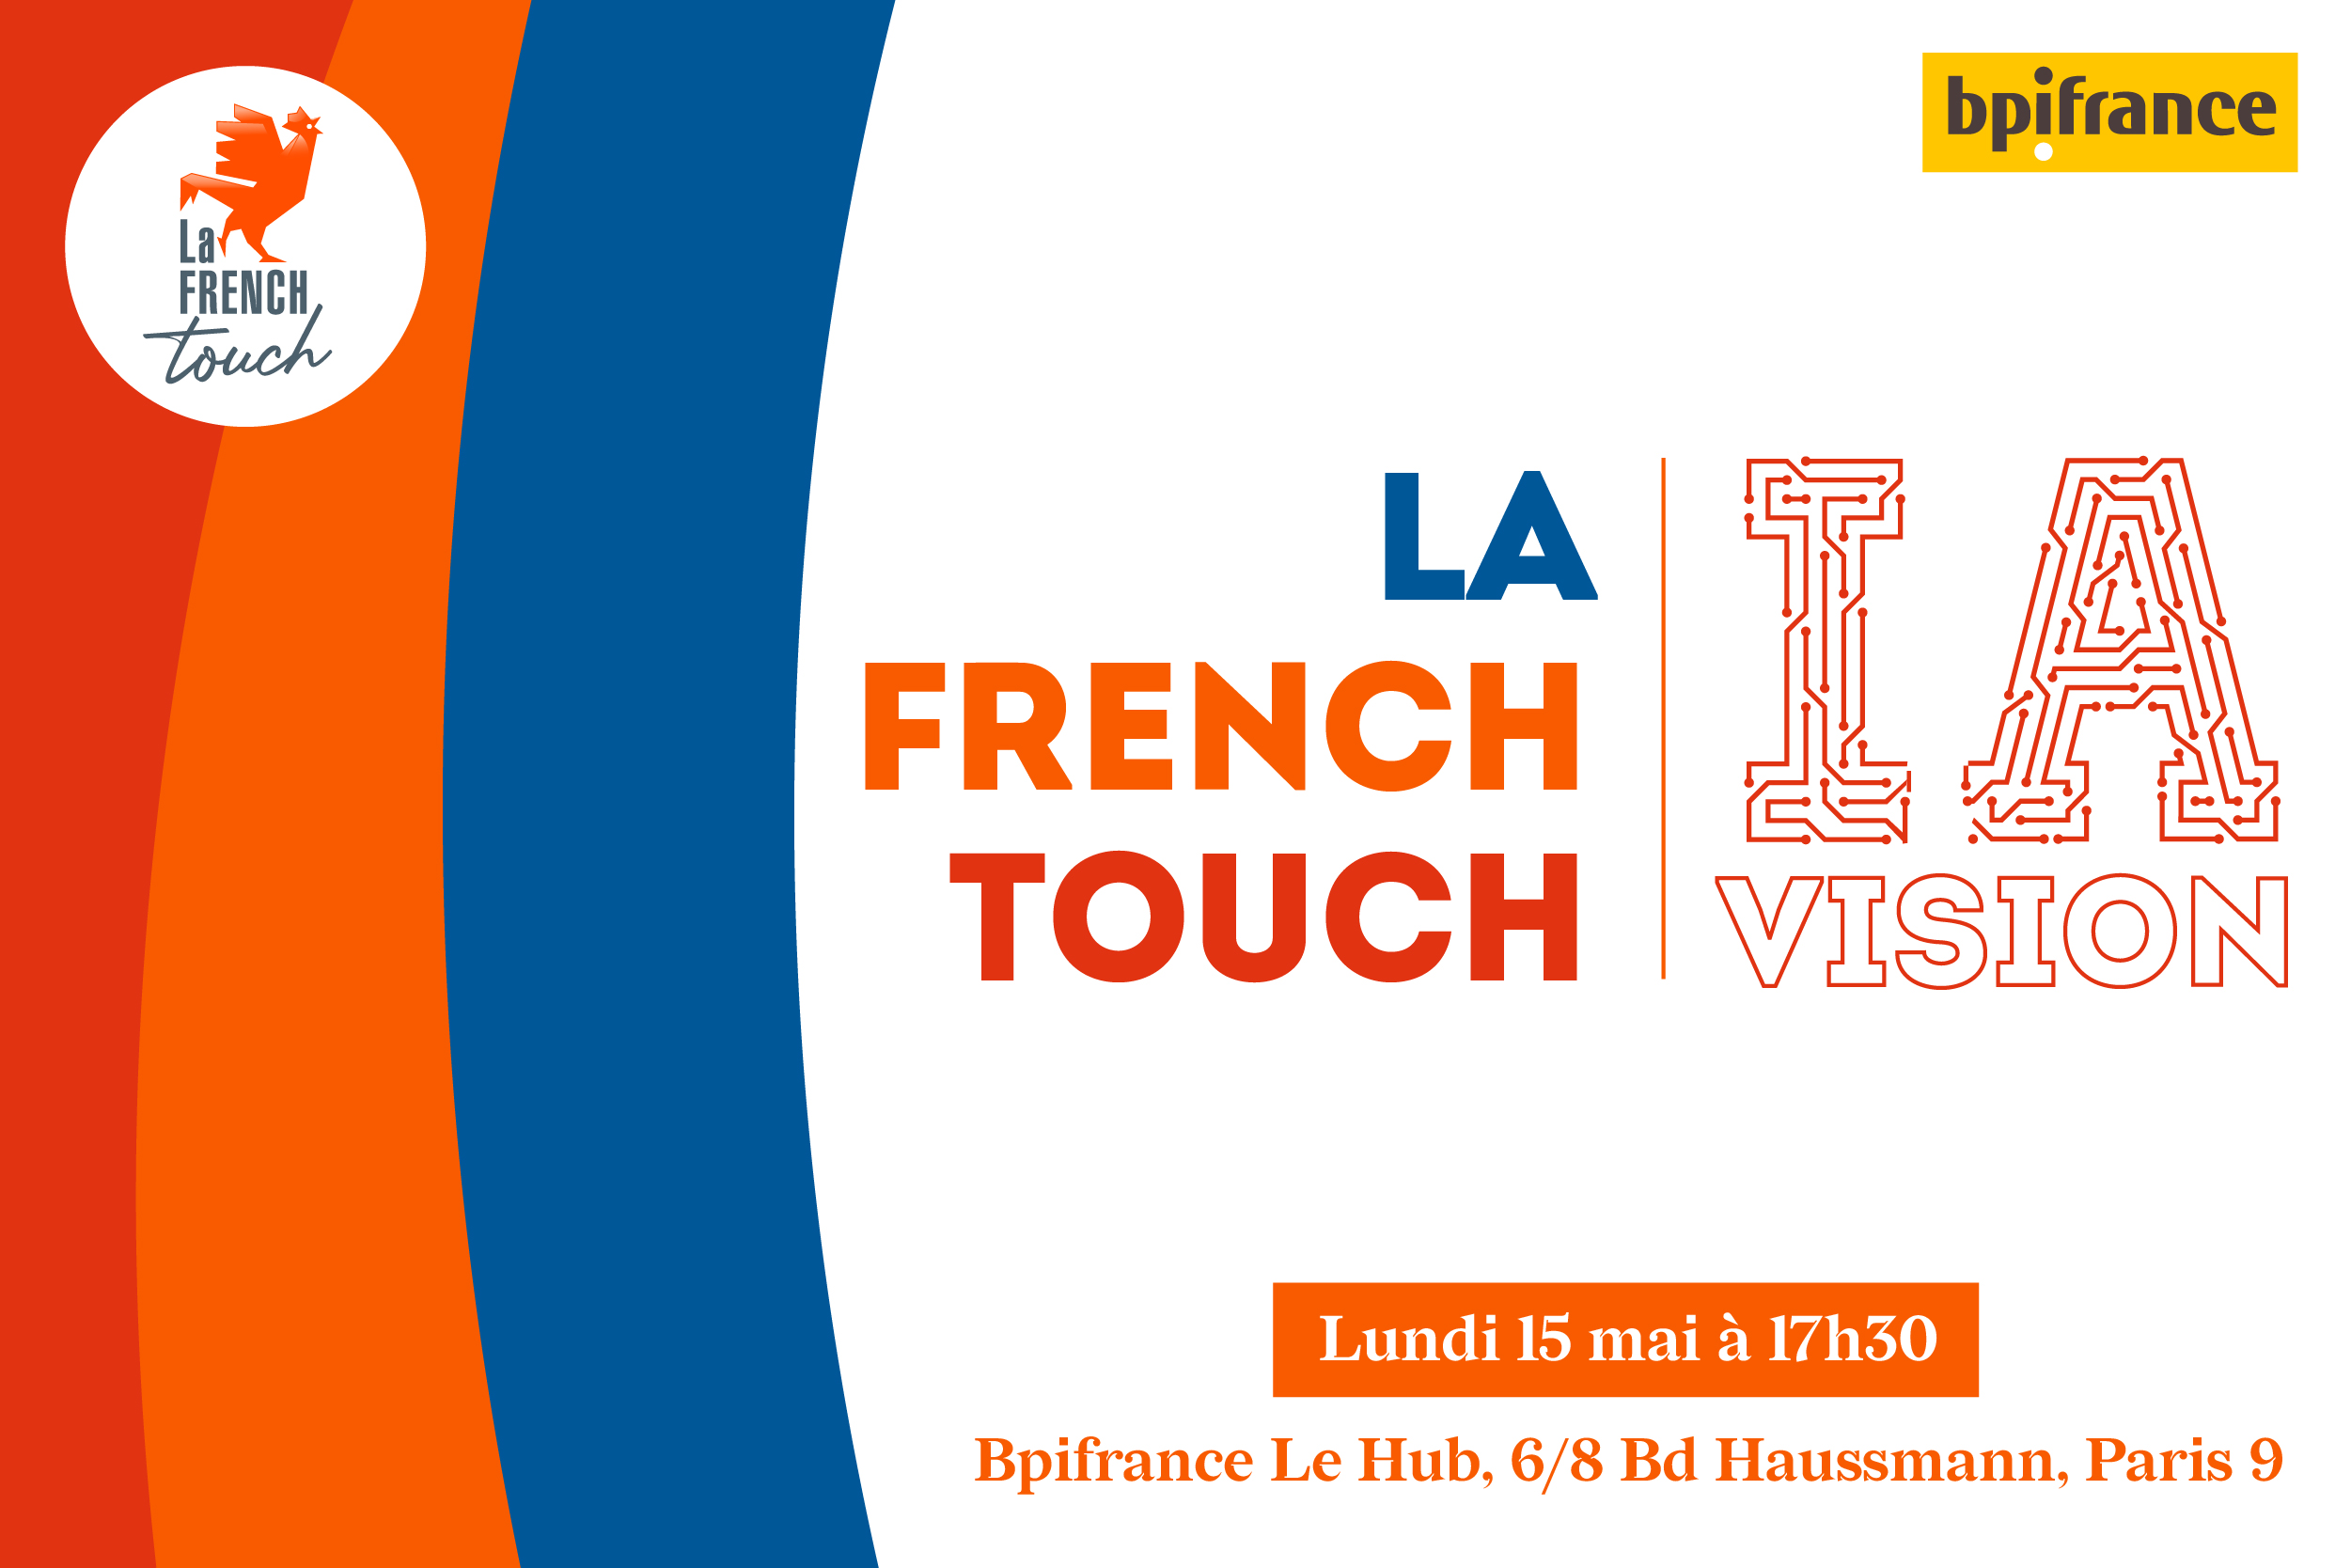 AGENDA FRENCH TOUCH IA VISION Ft